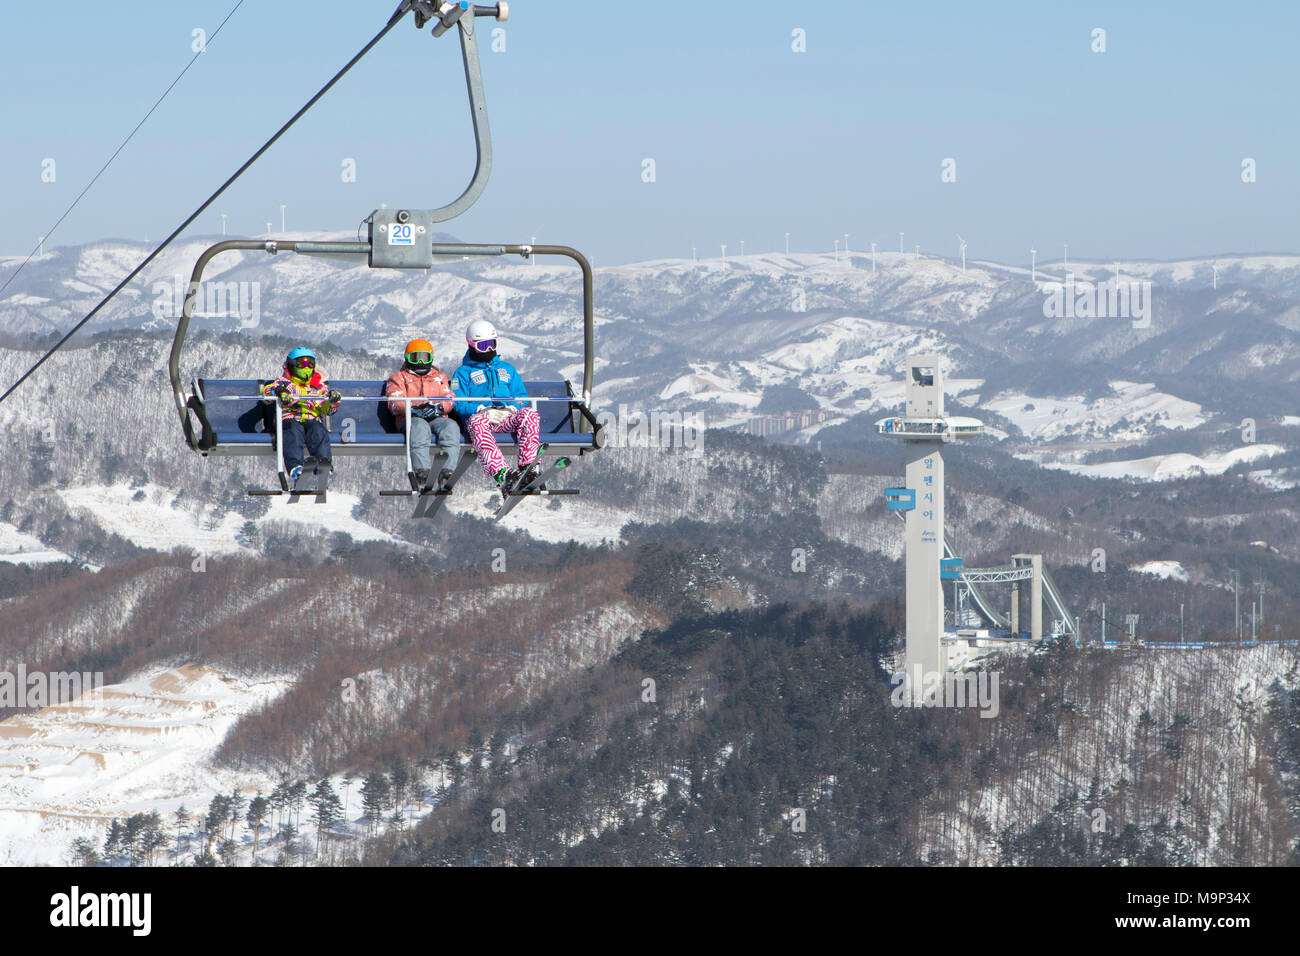 Colorful dressed skiers in a chair lift high above Alpensia resort in the Gangwon-do region of South Korea.  The Alpensia Resort is a ski resort and a tourist attraction. It is located on the territory of the township of Daegwallyeong-myeon, in the county of Pyeongchang, hosting the Winter Olympics in February 2018.  The ski resort is approximately 2.5 hours from Seoul or Incheon Airport by car, predominantly all motorway.   Alpensia has six slopes for skiing and snowboarding, with runs up to 1.4 km (0.87 mi) long, for beginners and advanced skiers, and an area reserved for snowboarders. Stock Photo